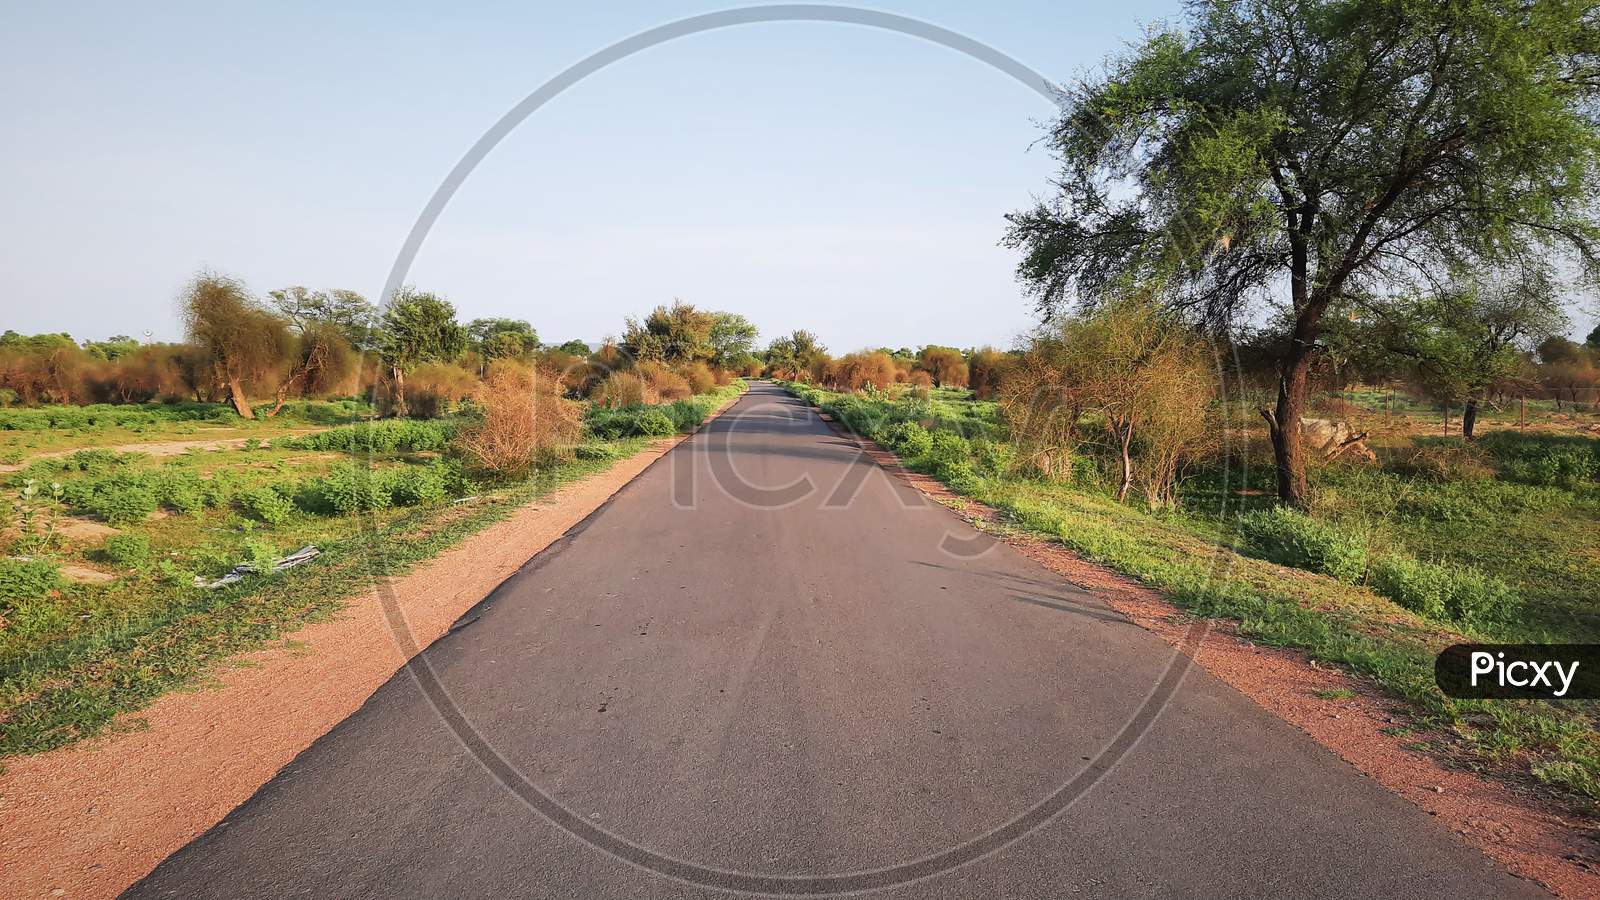 Asphalt Road In Rural Area Of India With Grunge On Edges